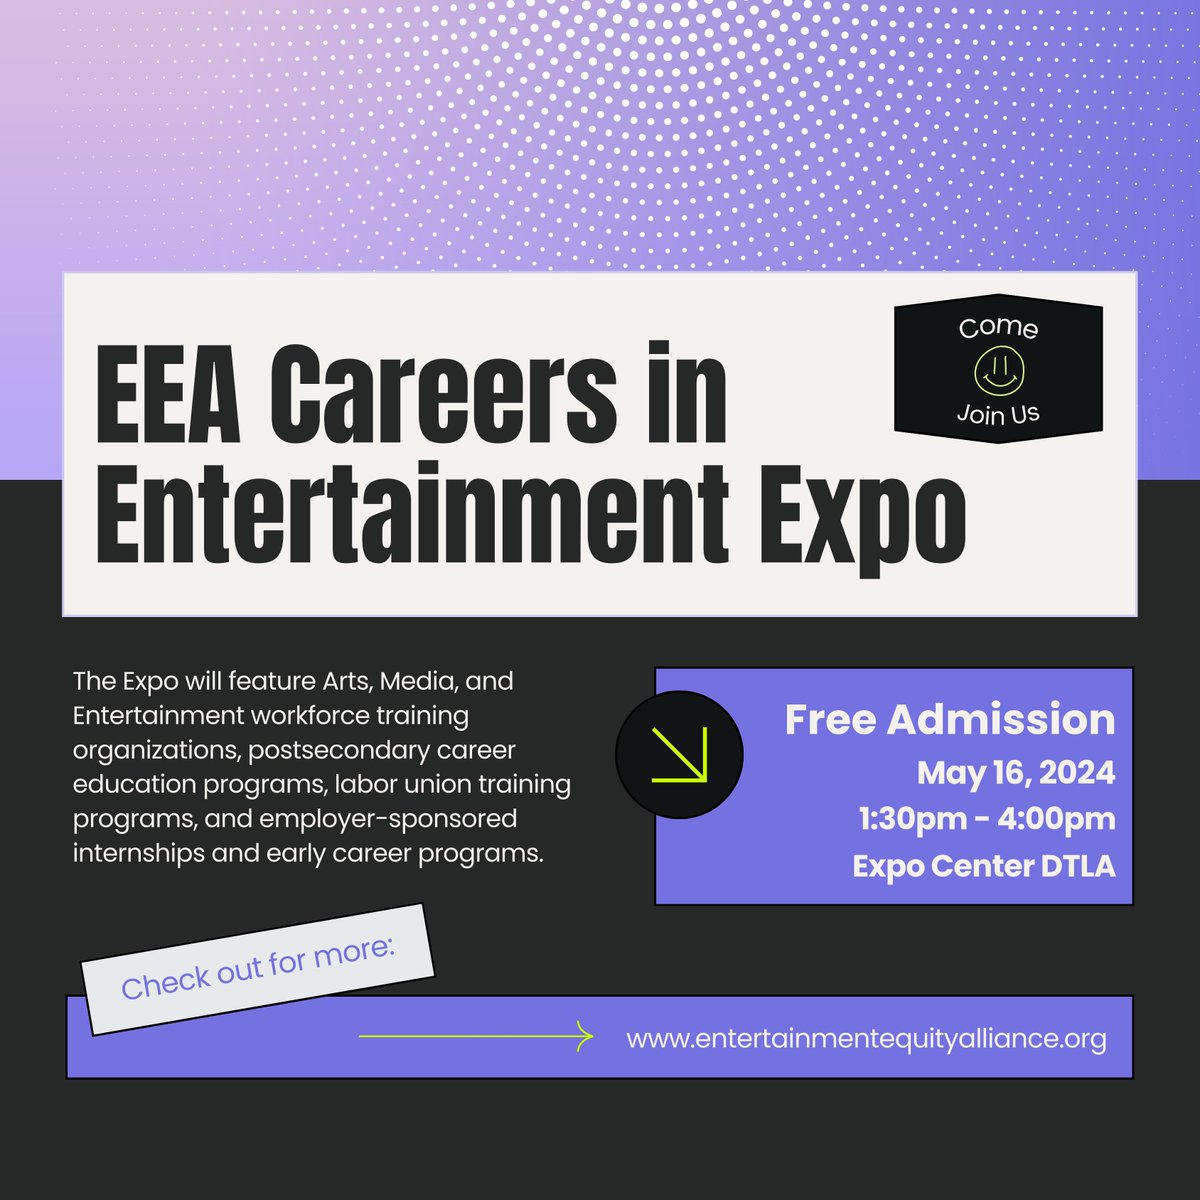 Calling all LA-based college, university, and young professionals! Join us for the Entertainment Equity Alliance (EEA) Careers in Entertainment Expo on May 16 from 1:30pm - 4pm. 📷 Register for free for the in-person event at entertainmentequityalliance.org